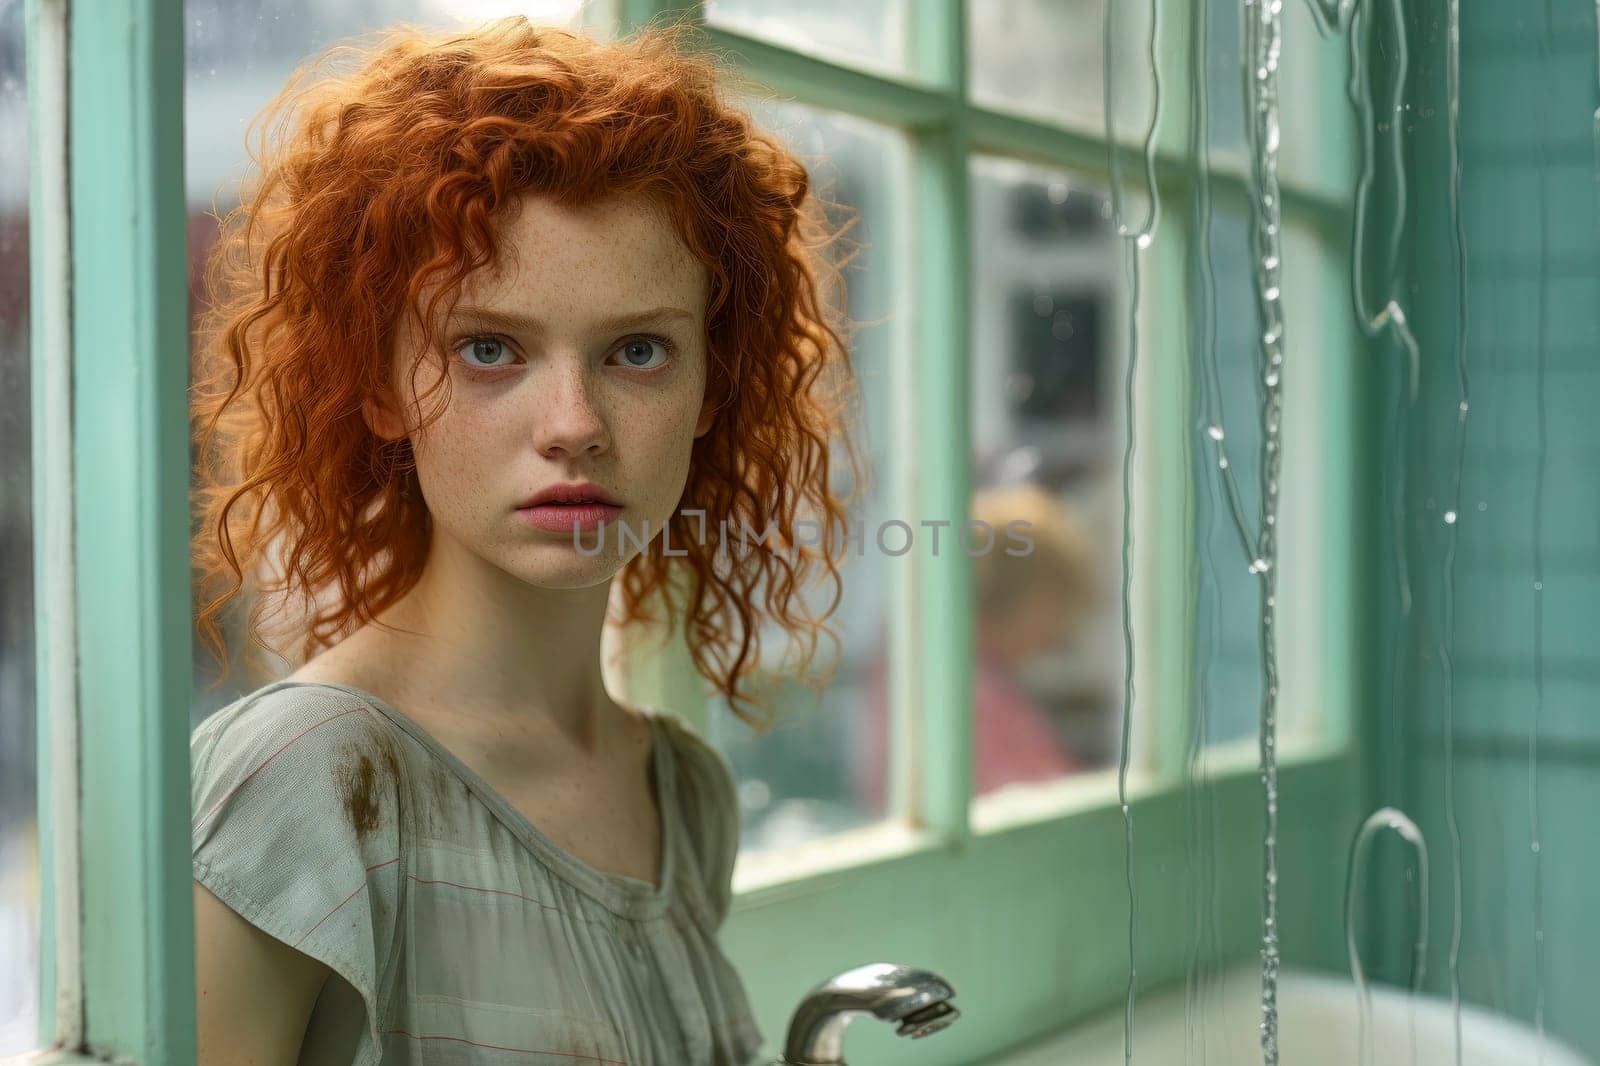 Distressed Redhead Girl Confronting Intruder at Home by pippocarlot